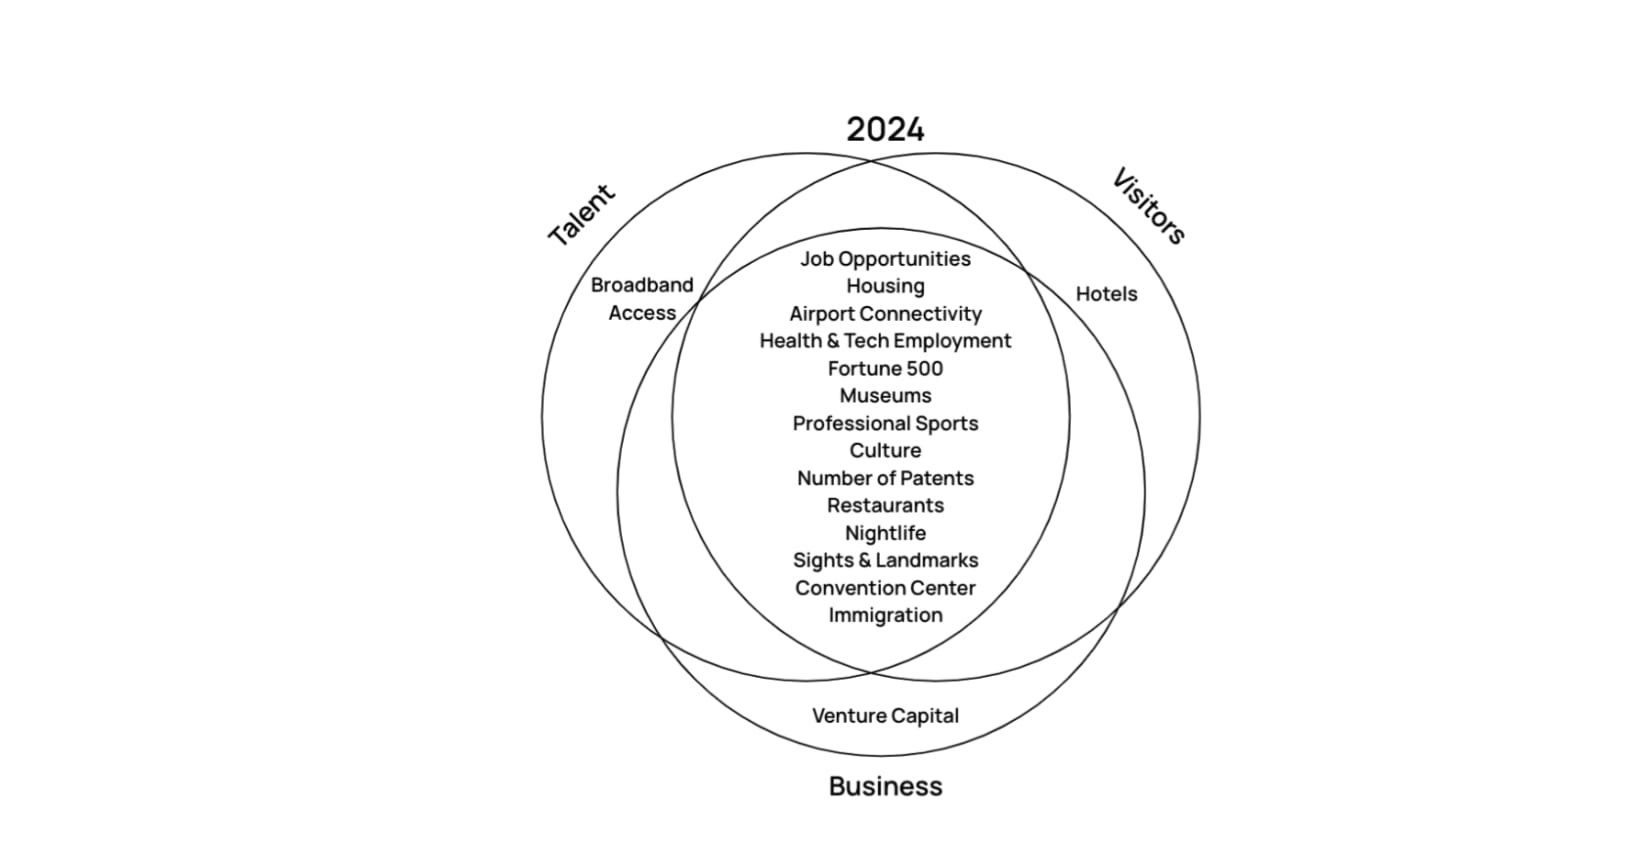 A venn diagram to show common factors for 2024. The three circles are marked talent, visitors, and businesses respectively. At the intersection of the three circles are many factors, including: job opportunities; housing; airport connectivity; health and tech employment; Fortune 500; Museums; professional sports; culture; number of patents; restaurants; nightlife; sights and landmarks; convention center; and immigration.